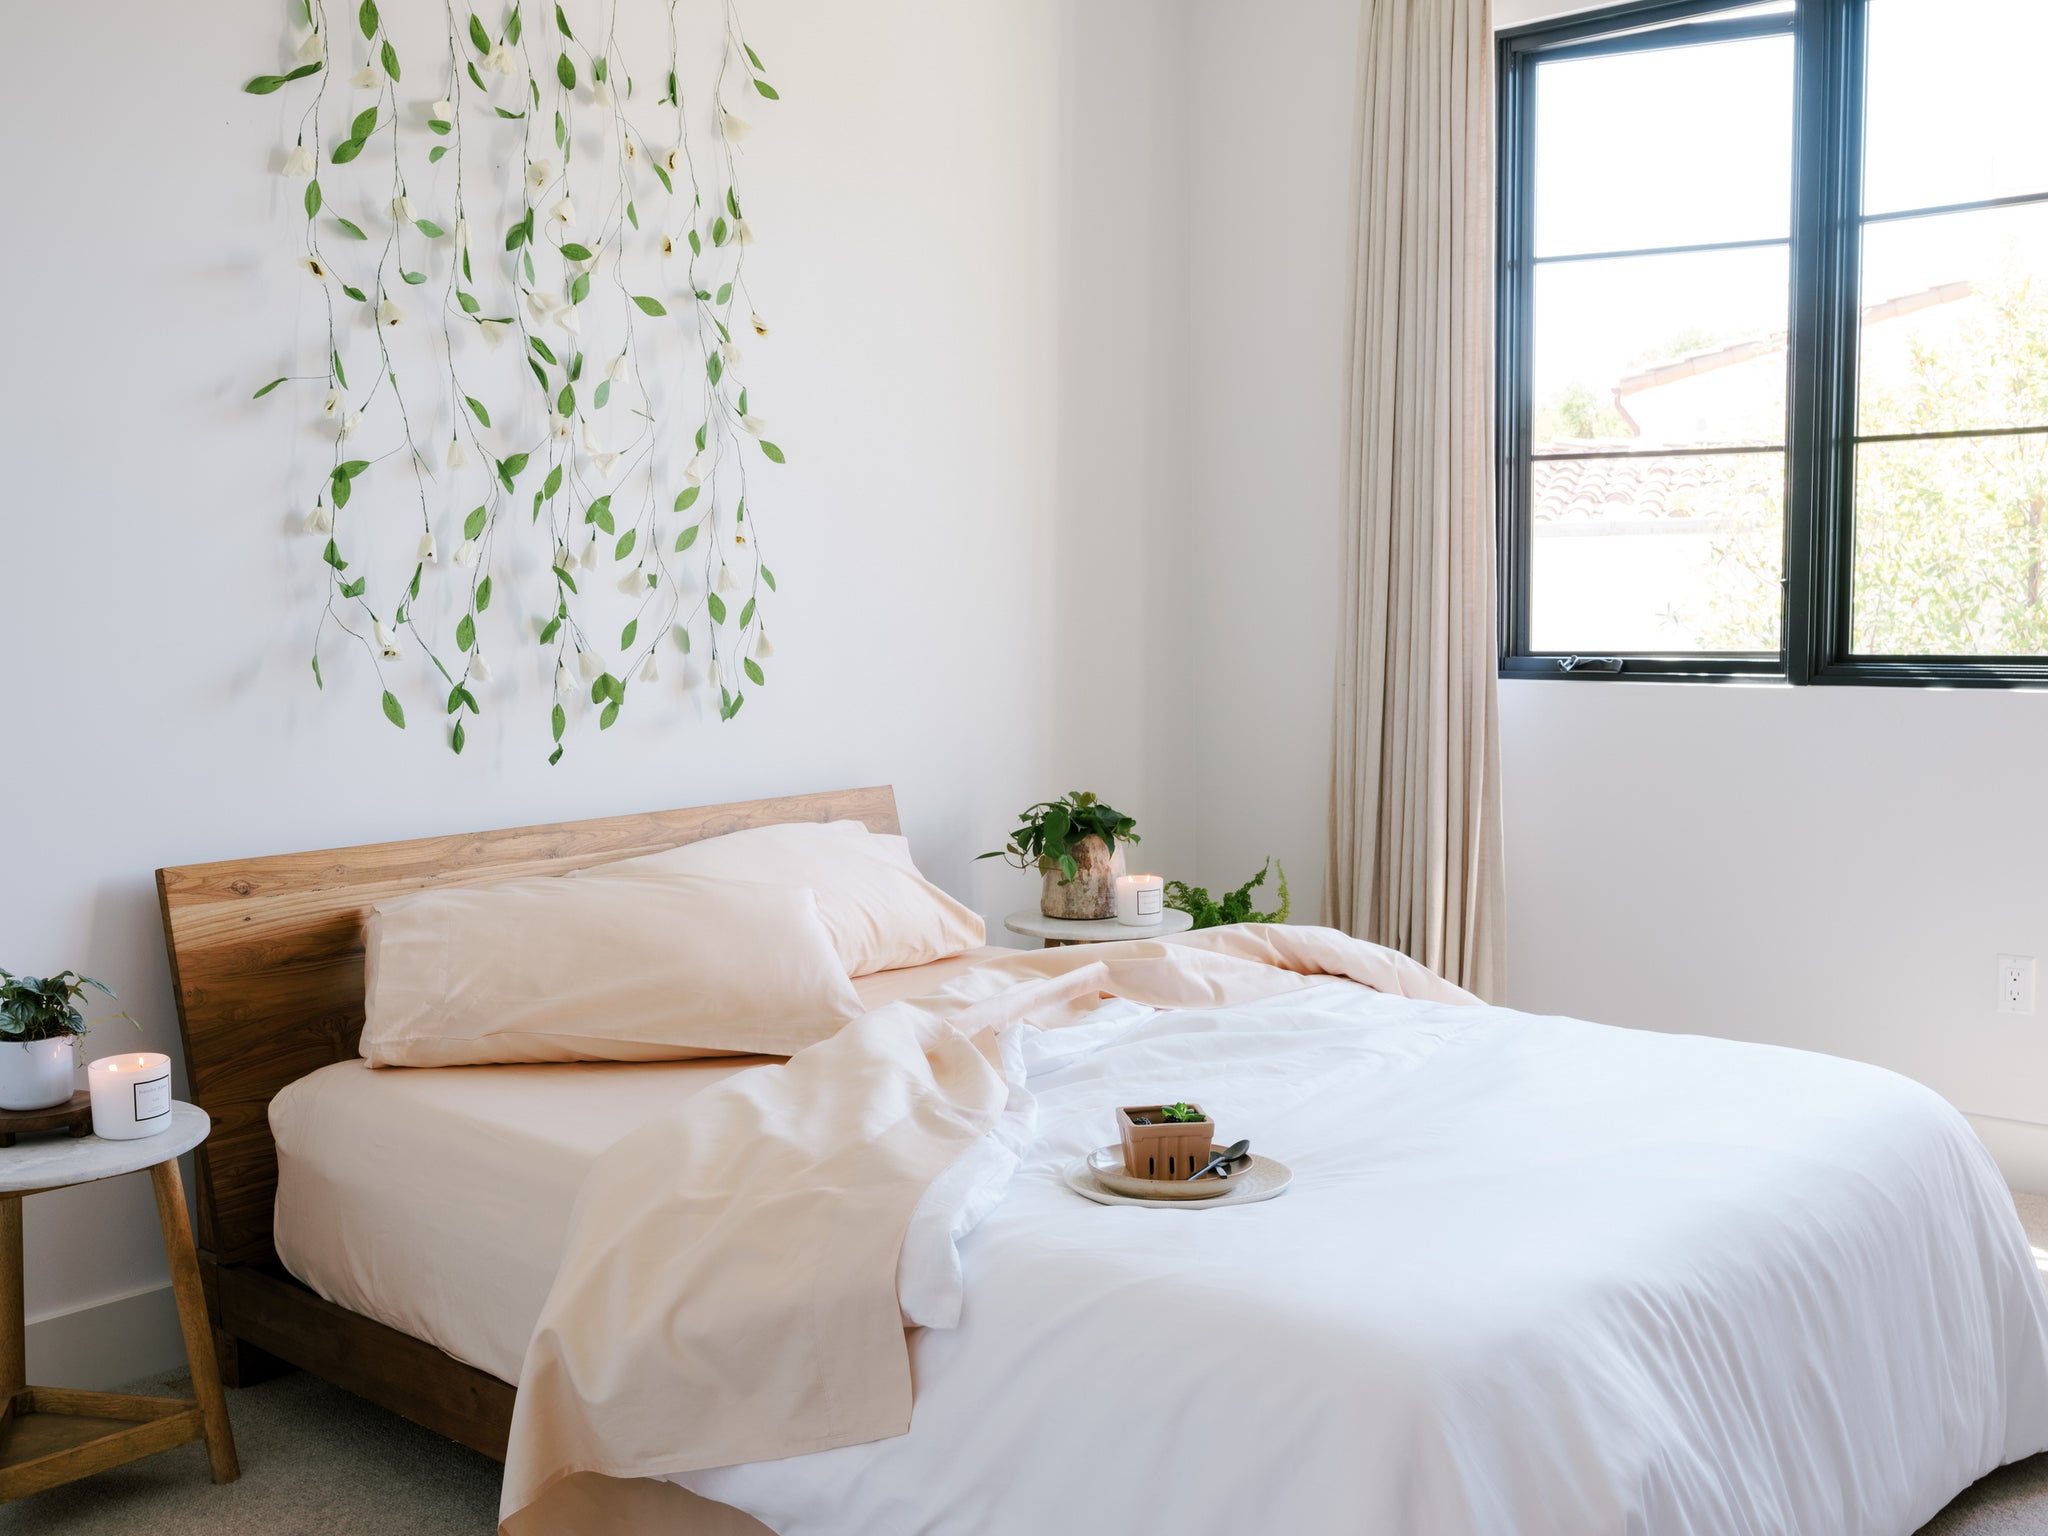 Apricot bed sheets complement the neutral bedroom decor